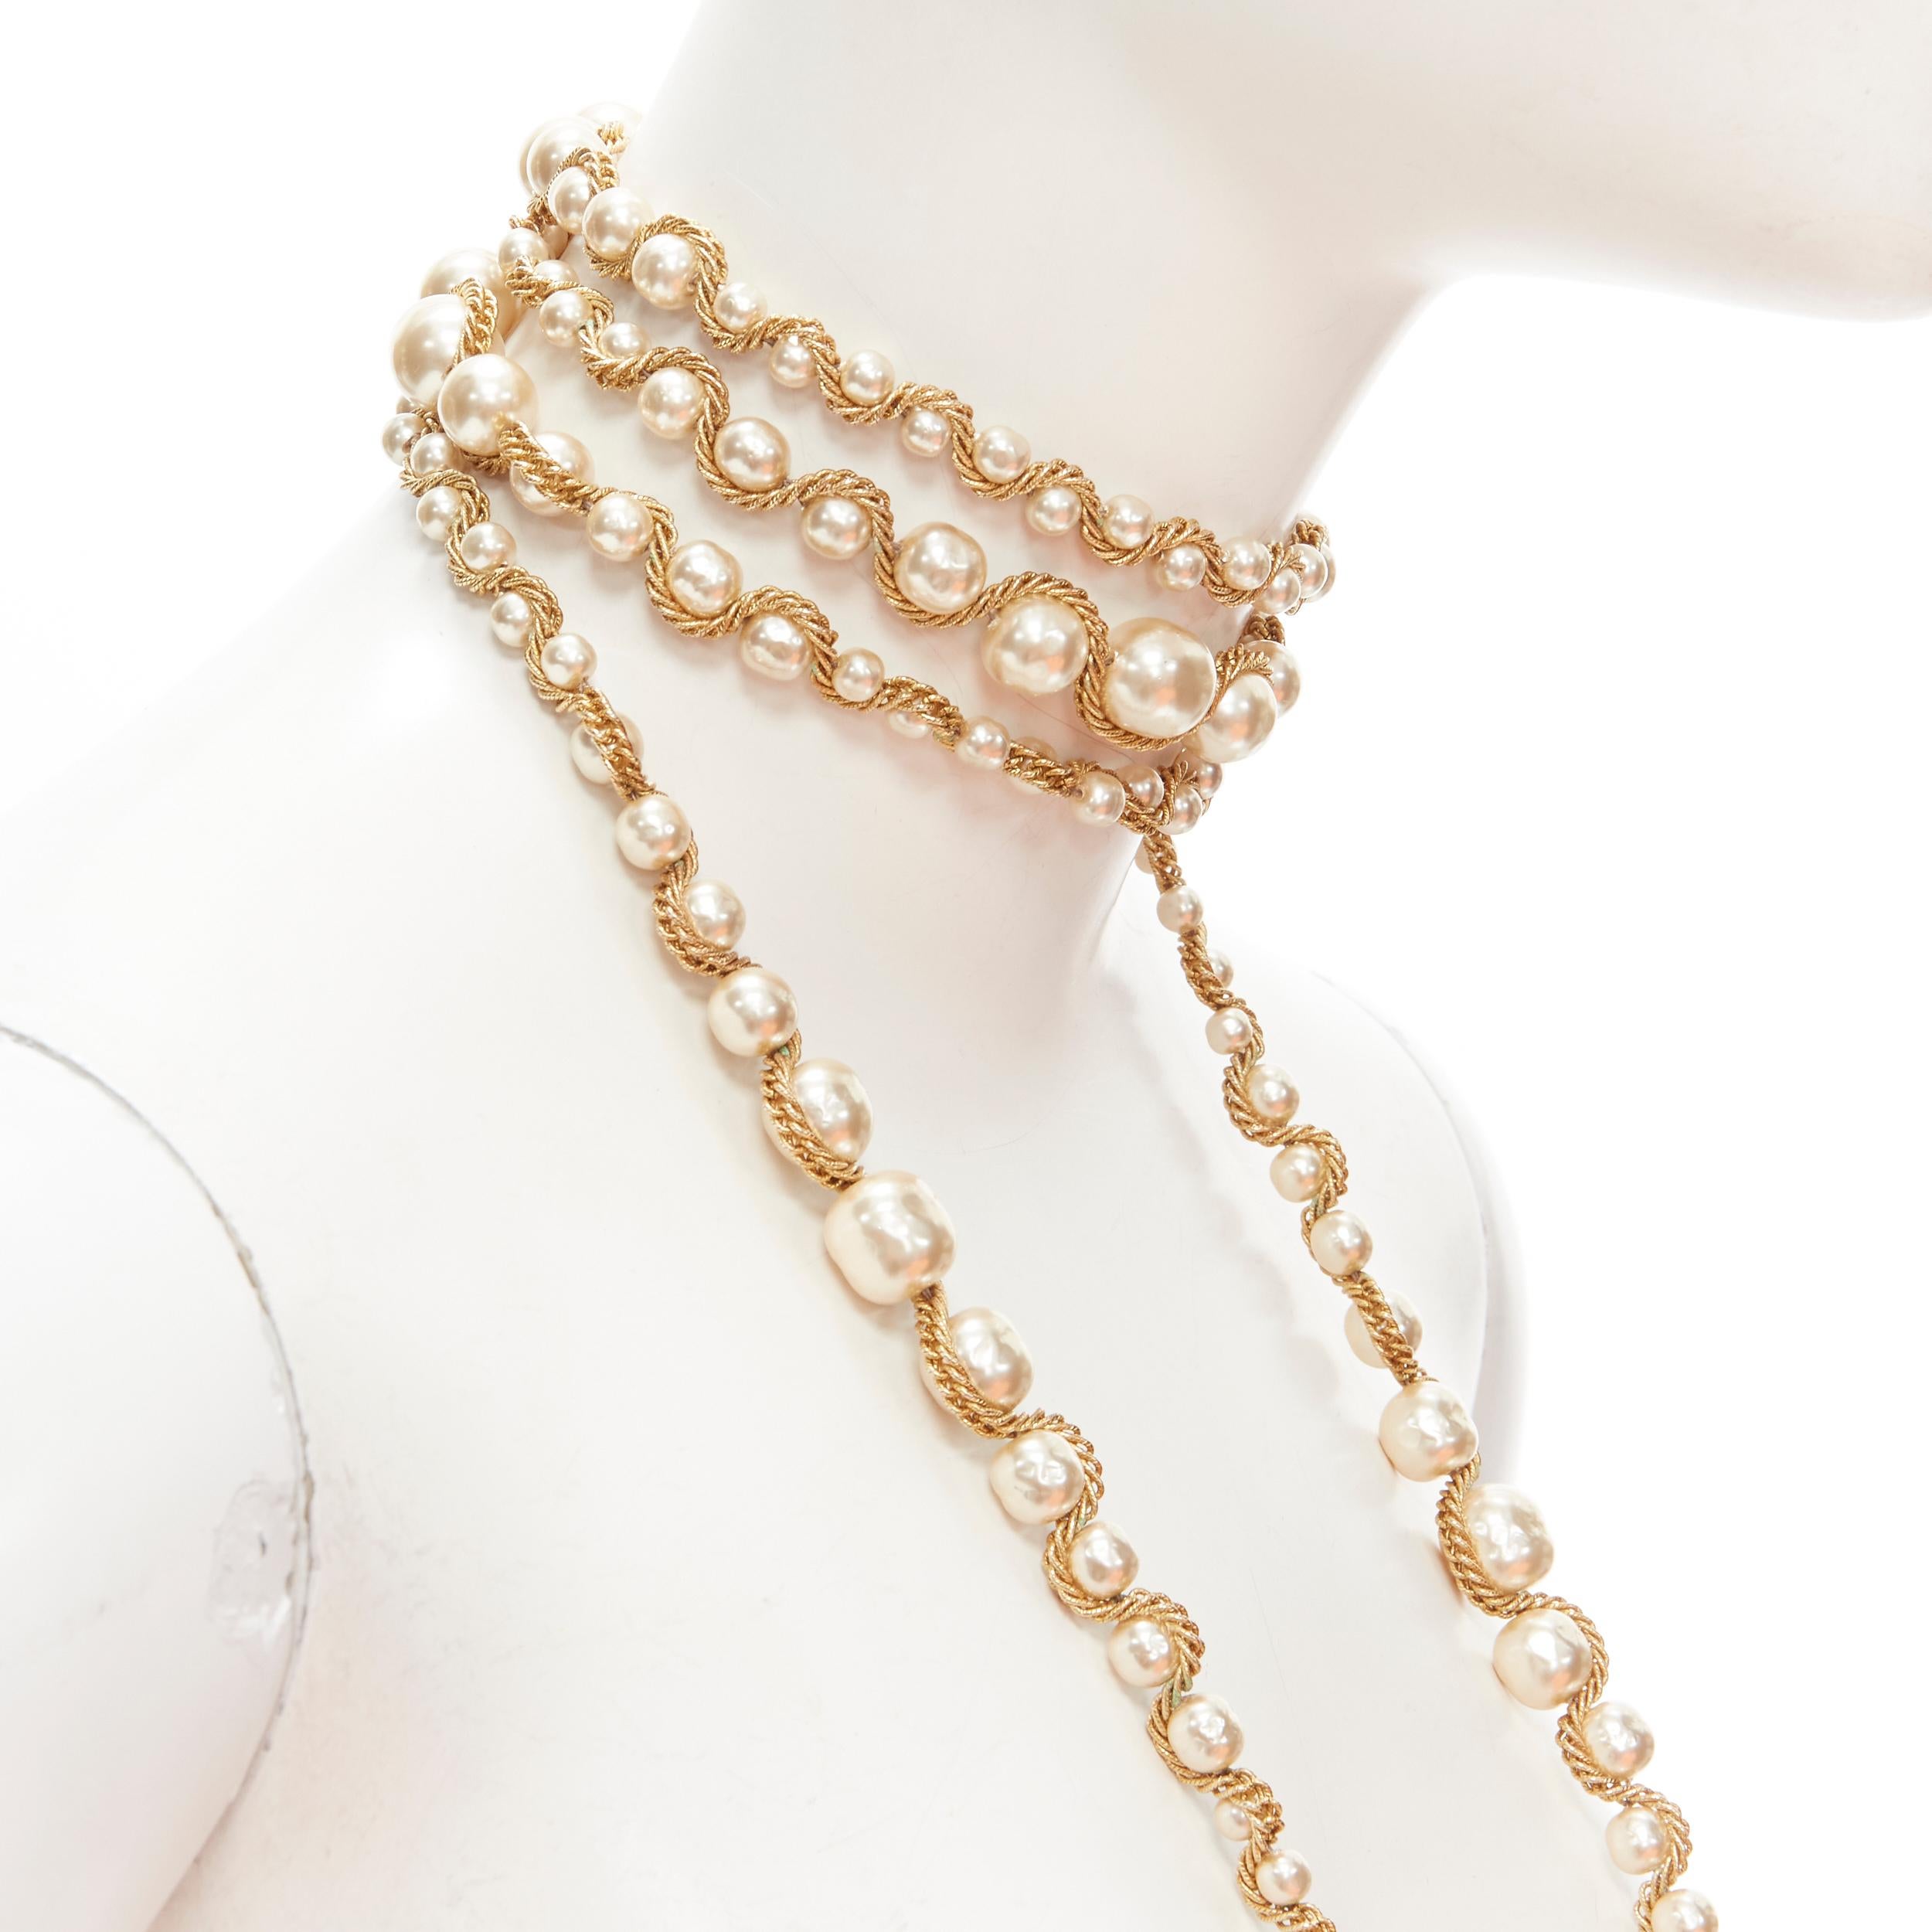 MIRIAM HASKELL faux pearl gold chain branded Sautoir necklace 
Reference: ANWU/A00279 
Brand: Miriam Haskell 
Material: Metal 
Color: Pearl 
Pattern: Solid 
Closure: Loop toggle 
Extra Detail: Mixed pearl sizes. 

CONDITION: 
Condition: Excellent,